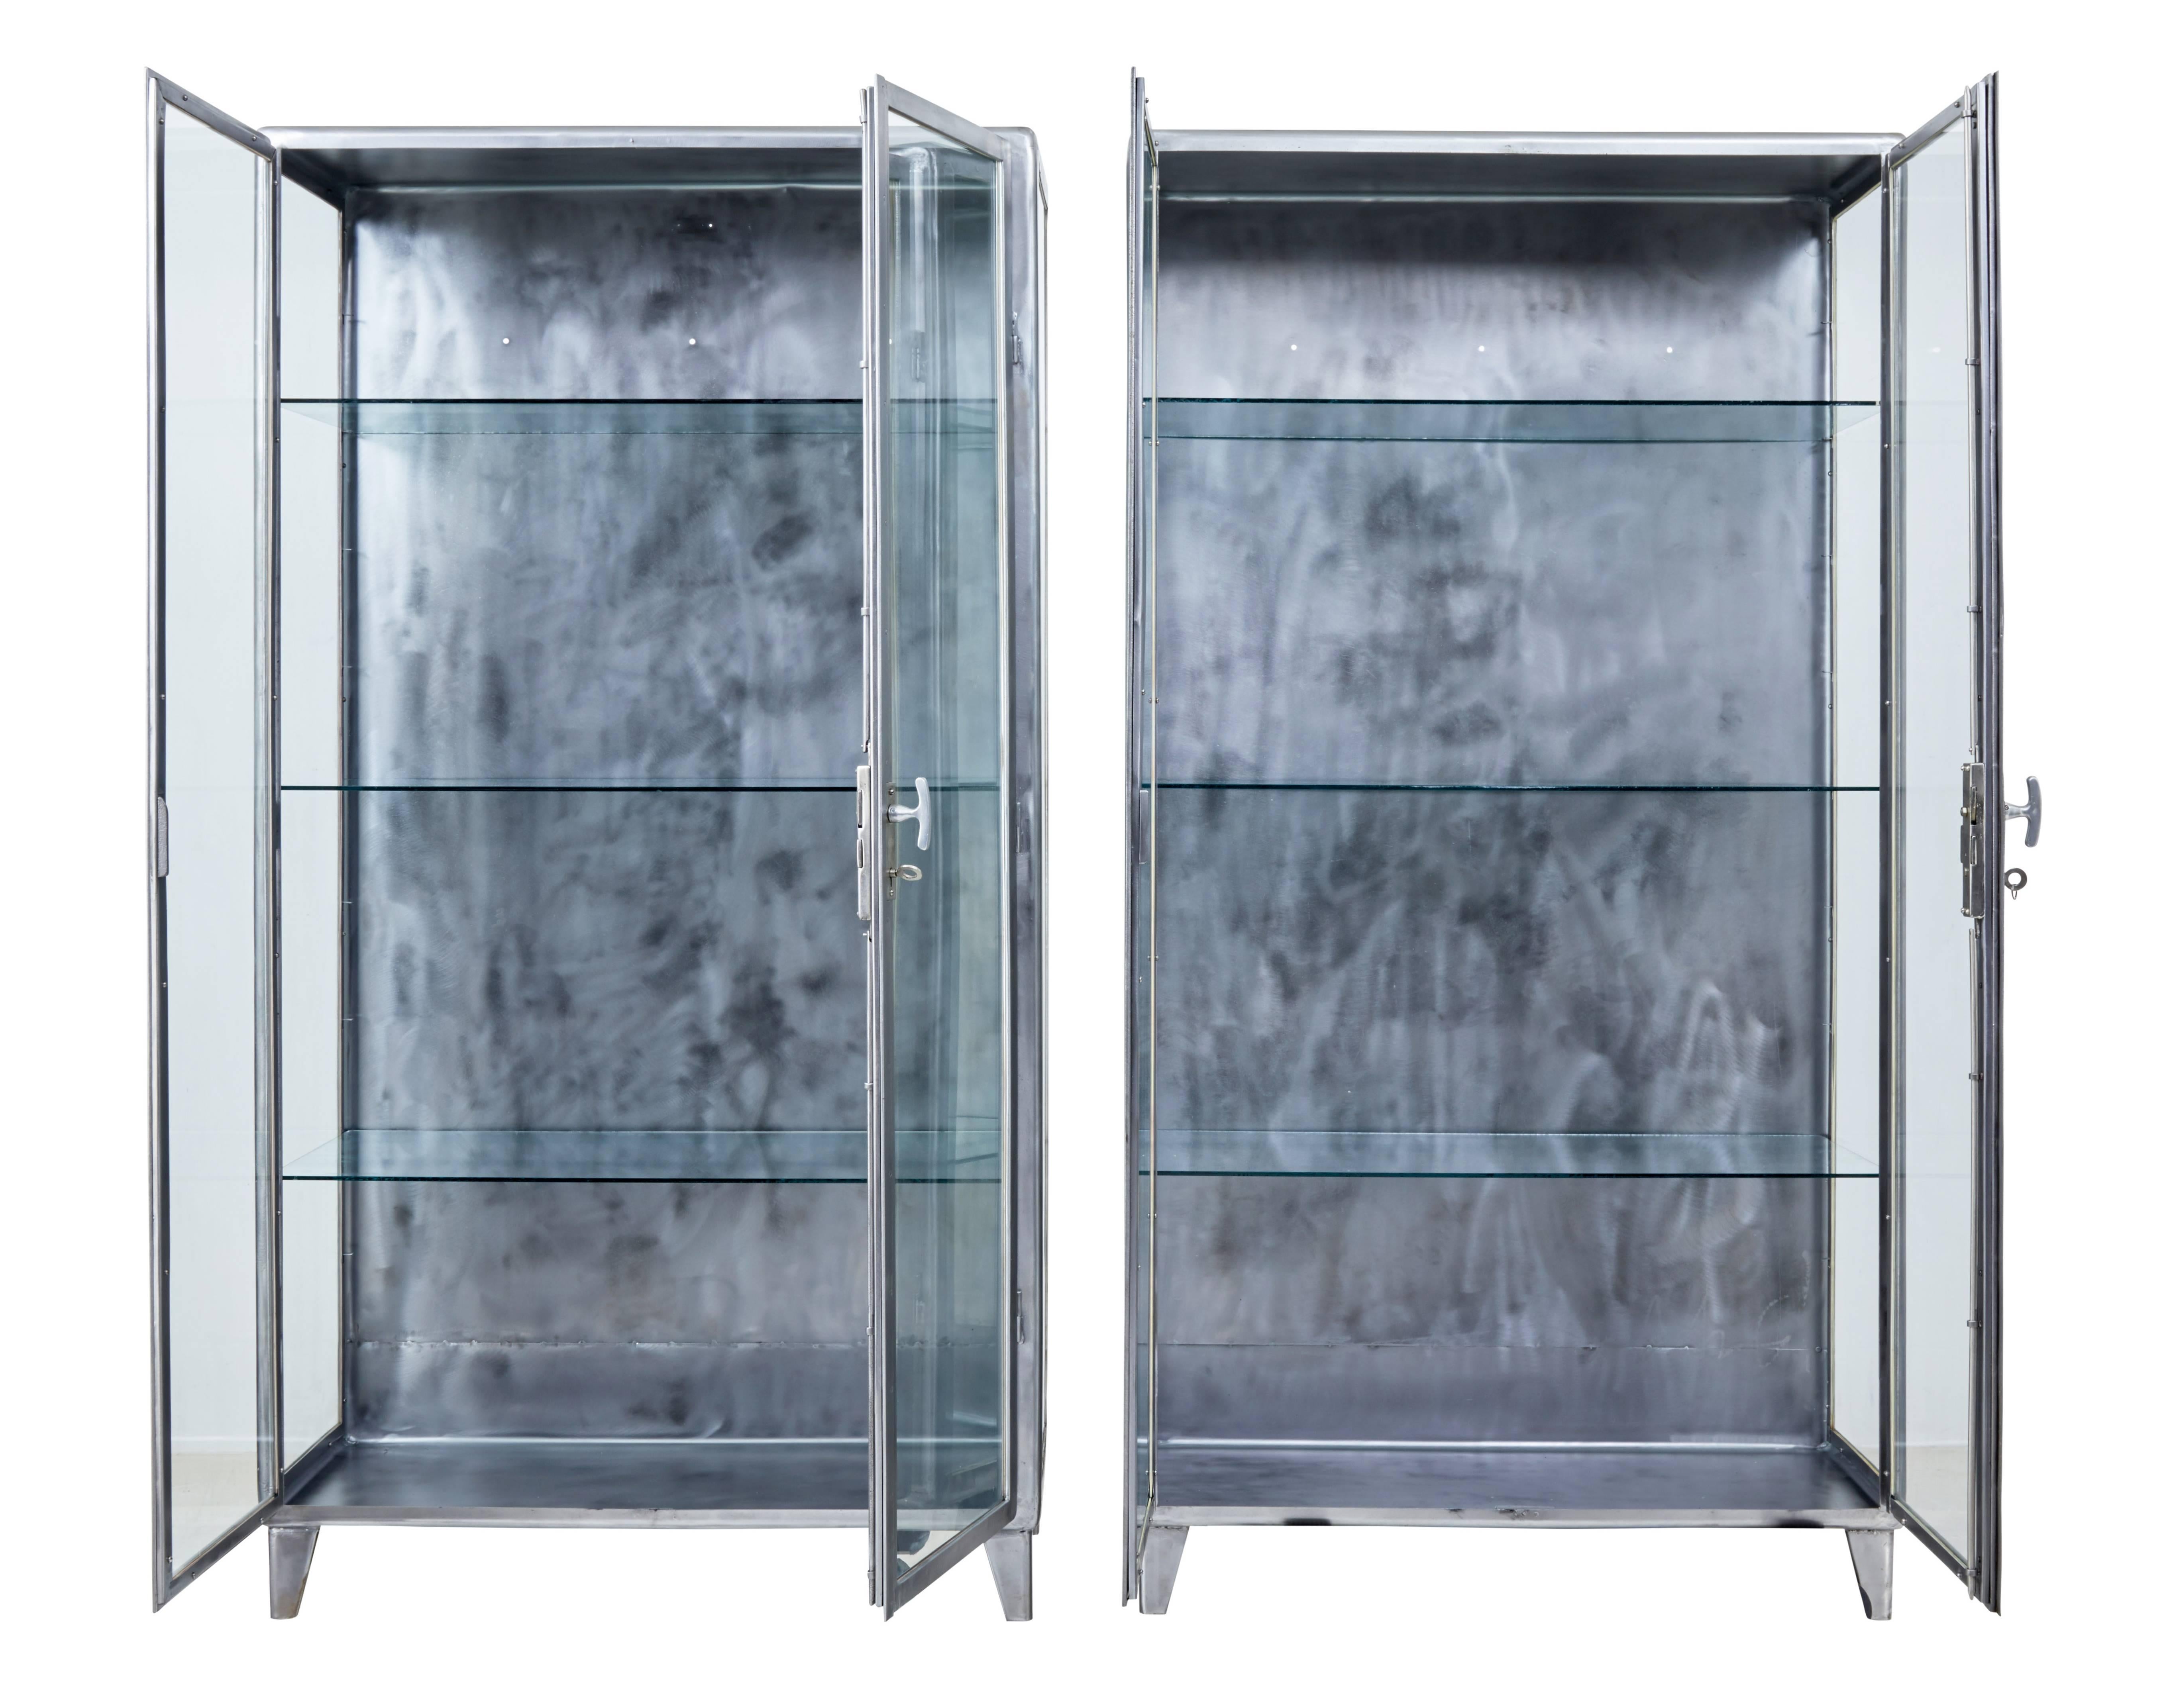 Fine pair of 1920s Art Deco design display cabinets.

These would have been a pair of medical display cabinets that have had the steel polished.

Original locks and keys. Double doors open to reveal 3 glass shelves in each.

Holes in the back